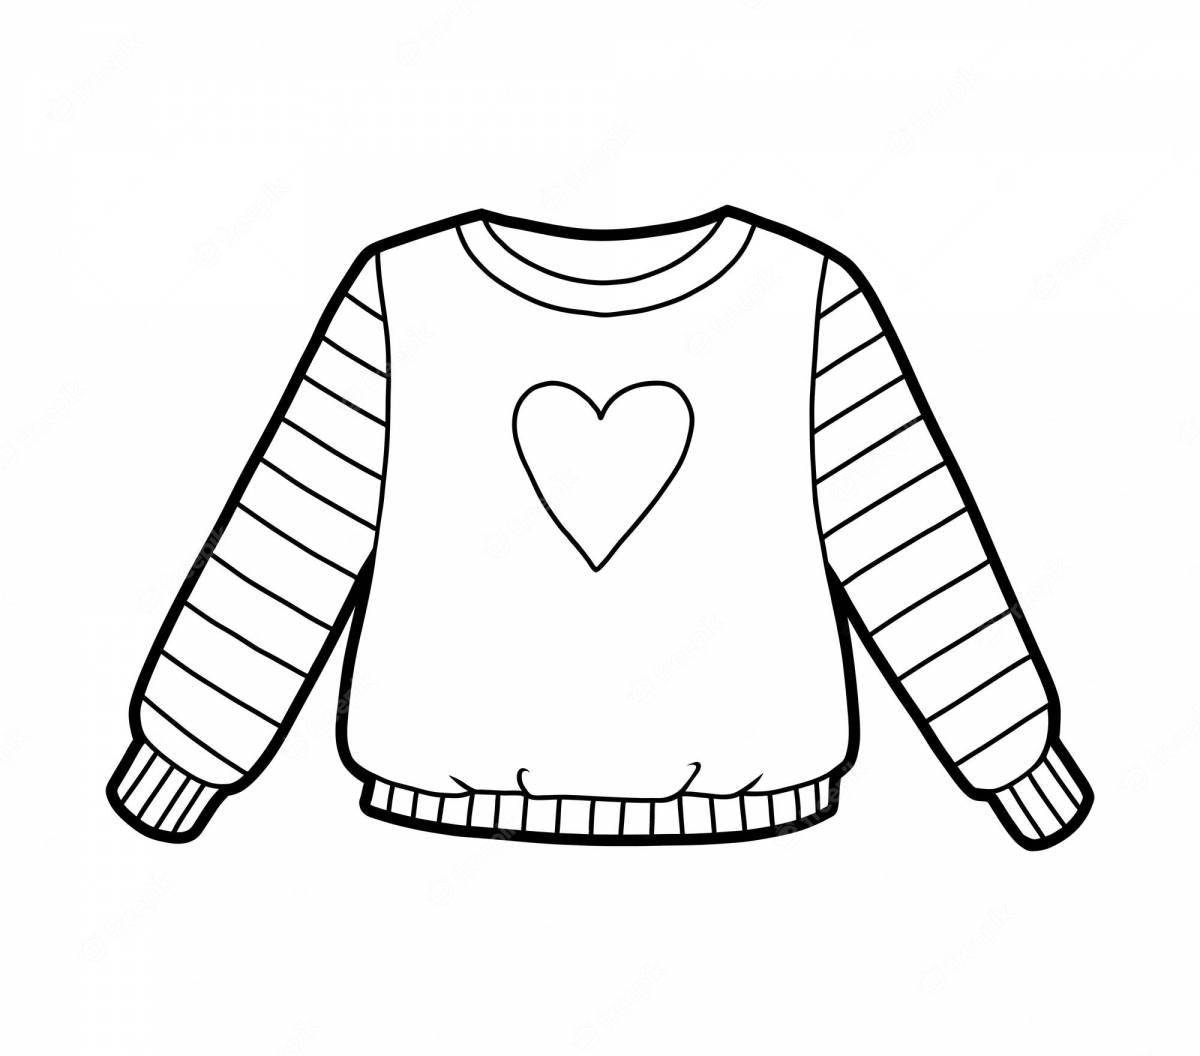 Glowing jumper coloring page